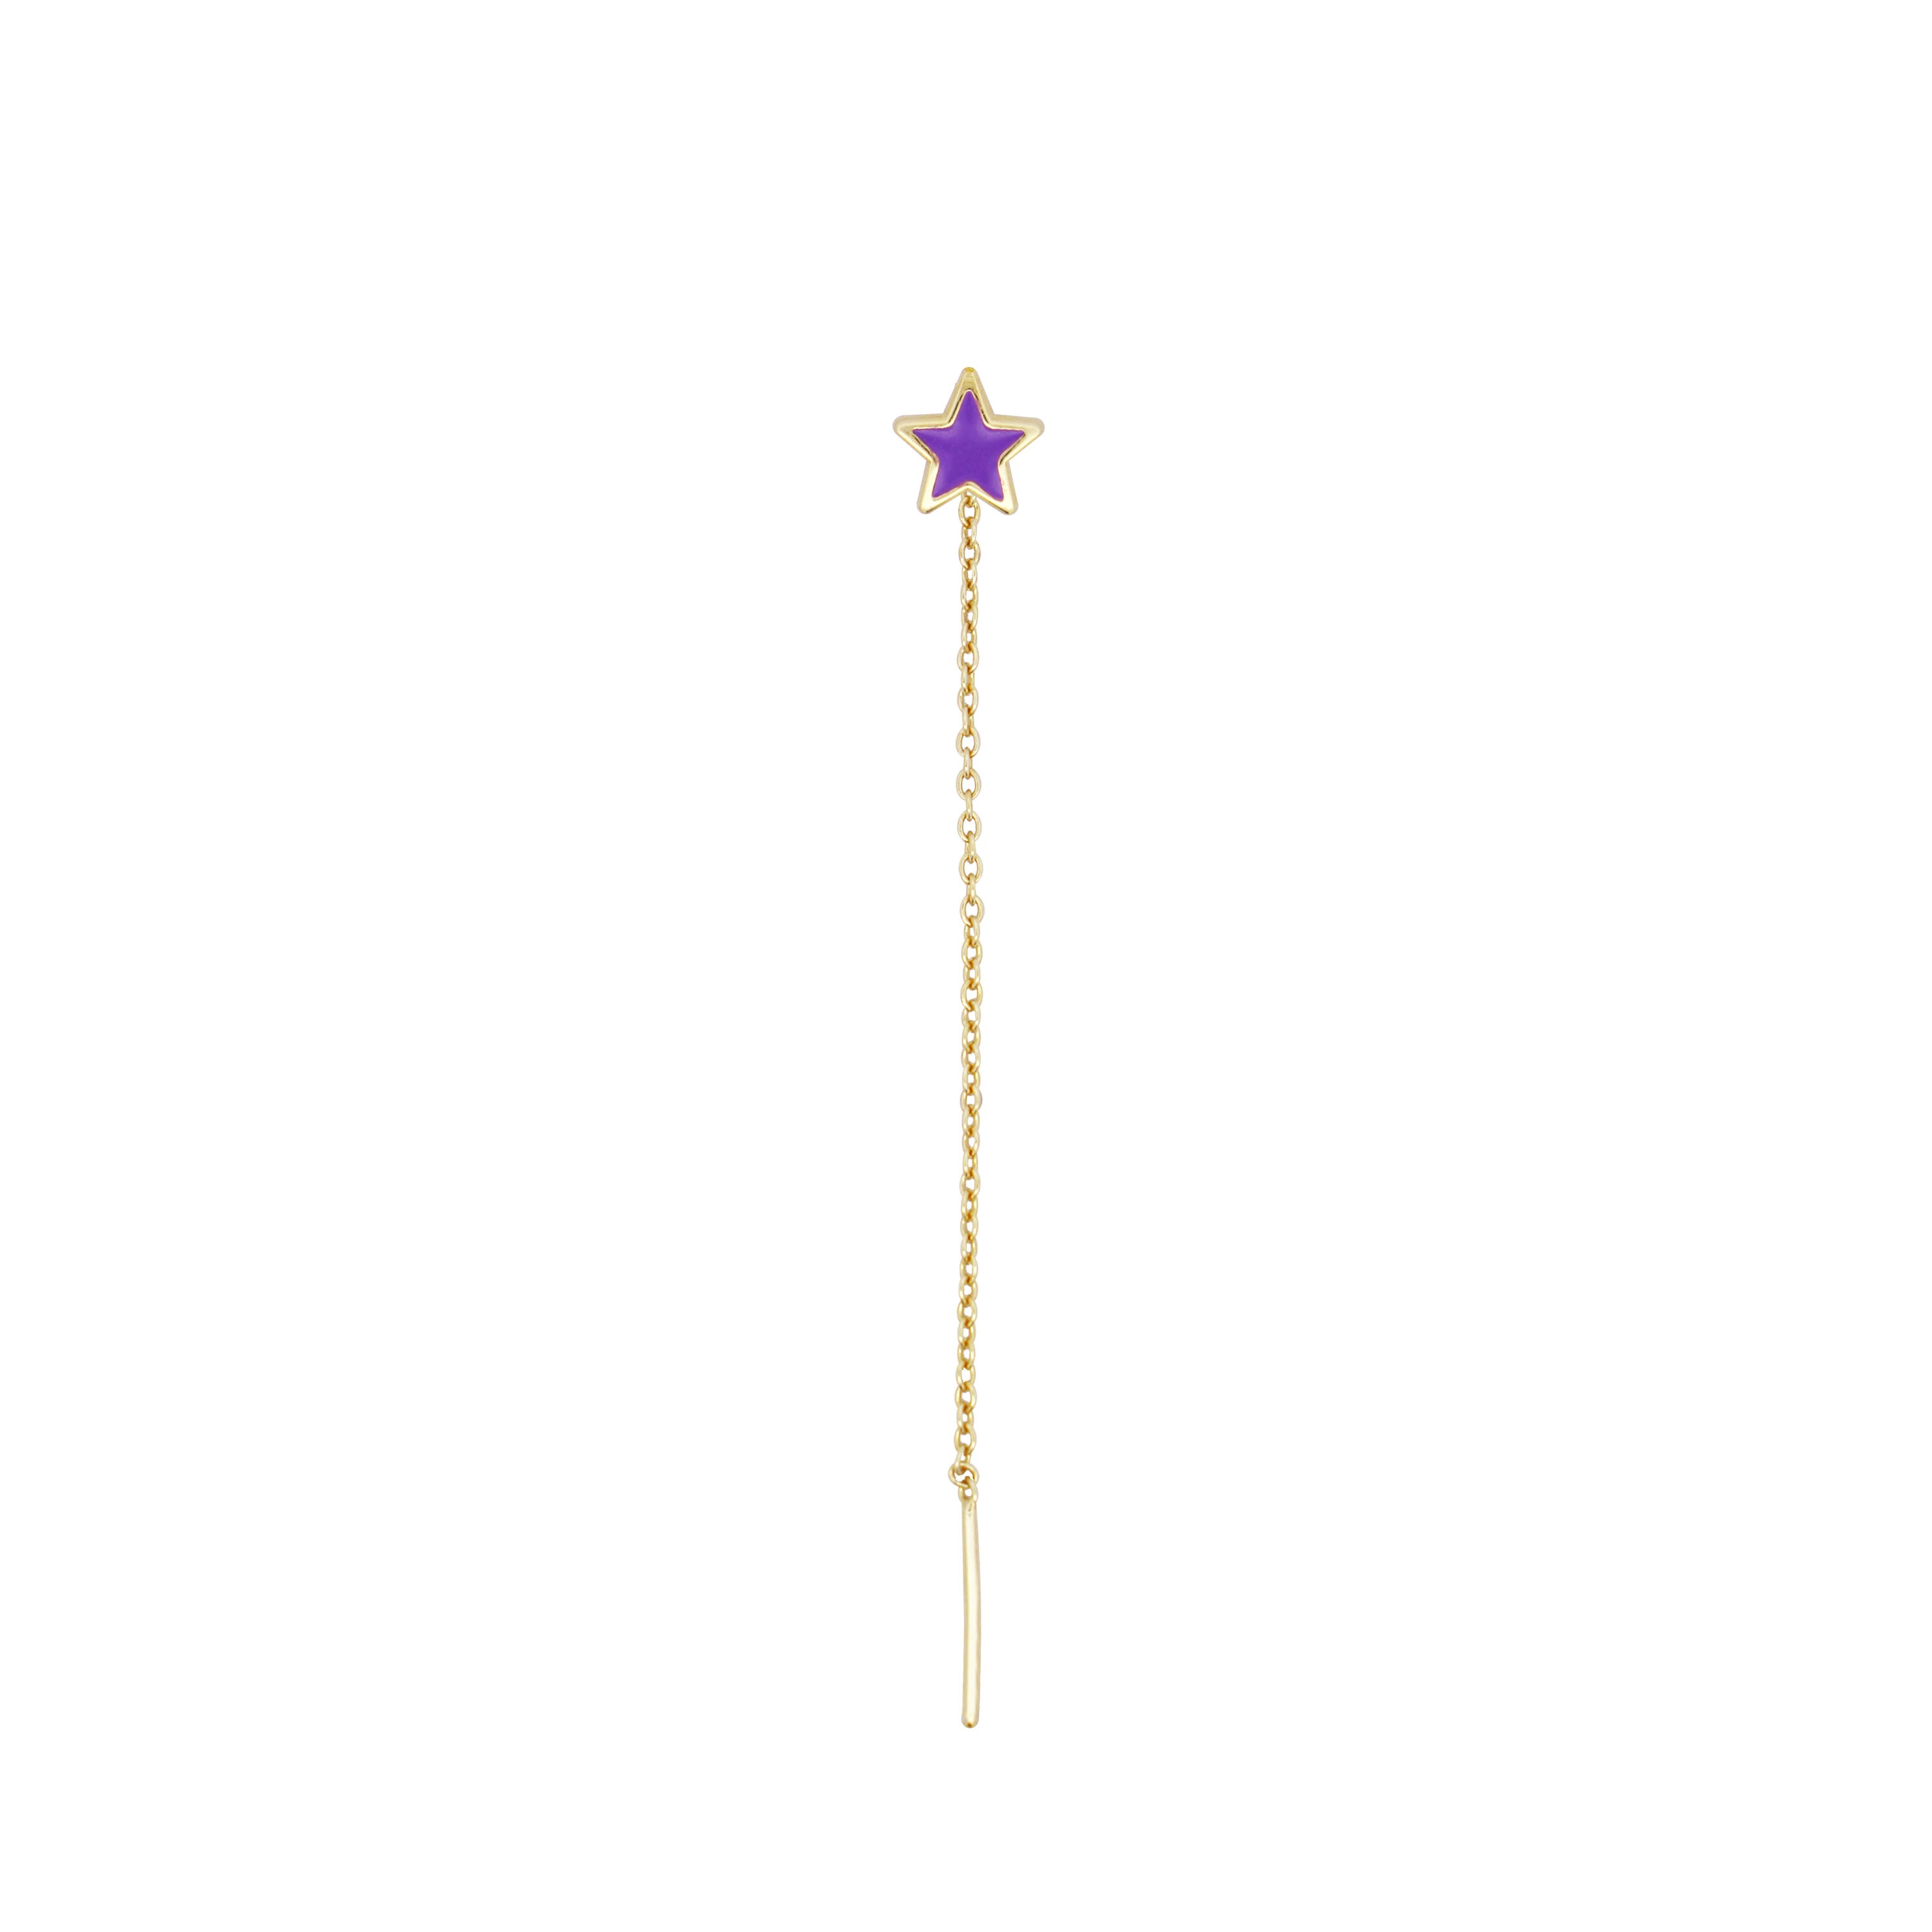 Single earring chain and enameled star - ColorFUN